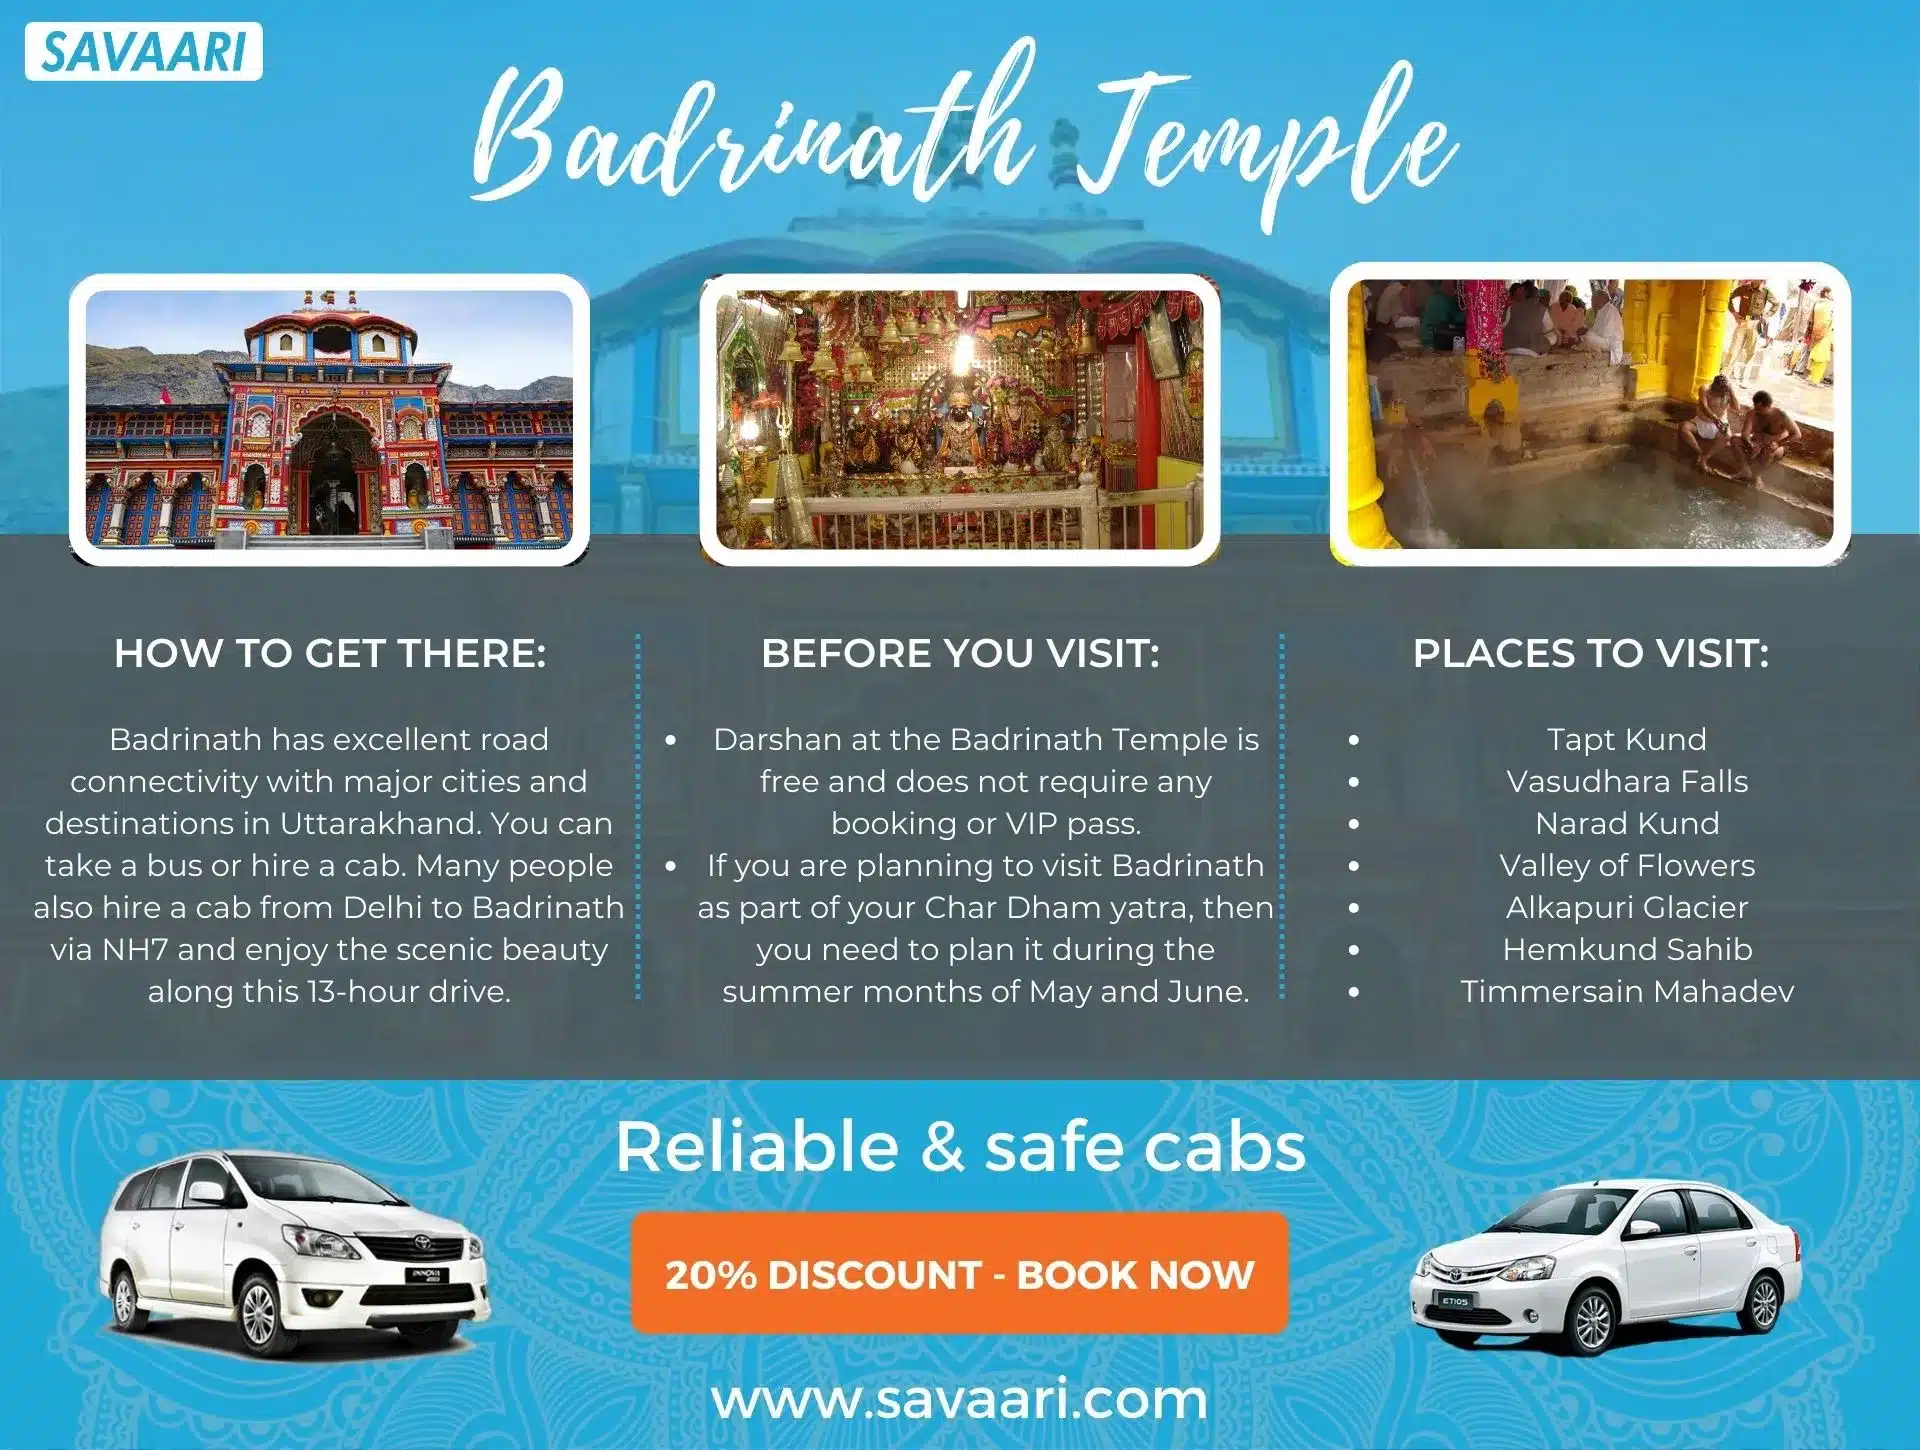 Things to do in Badrinath Temple